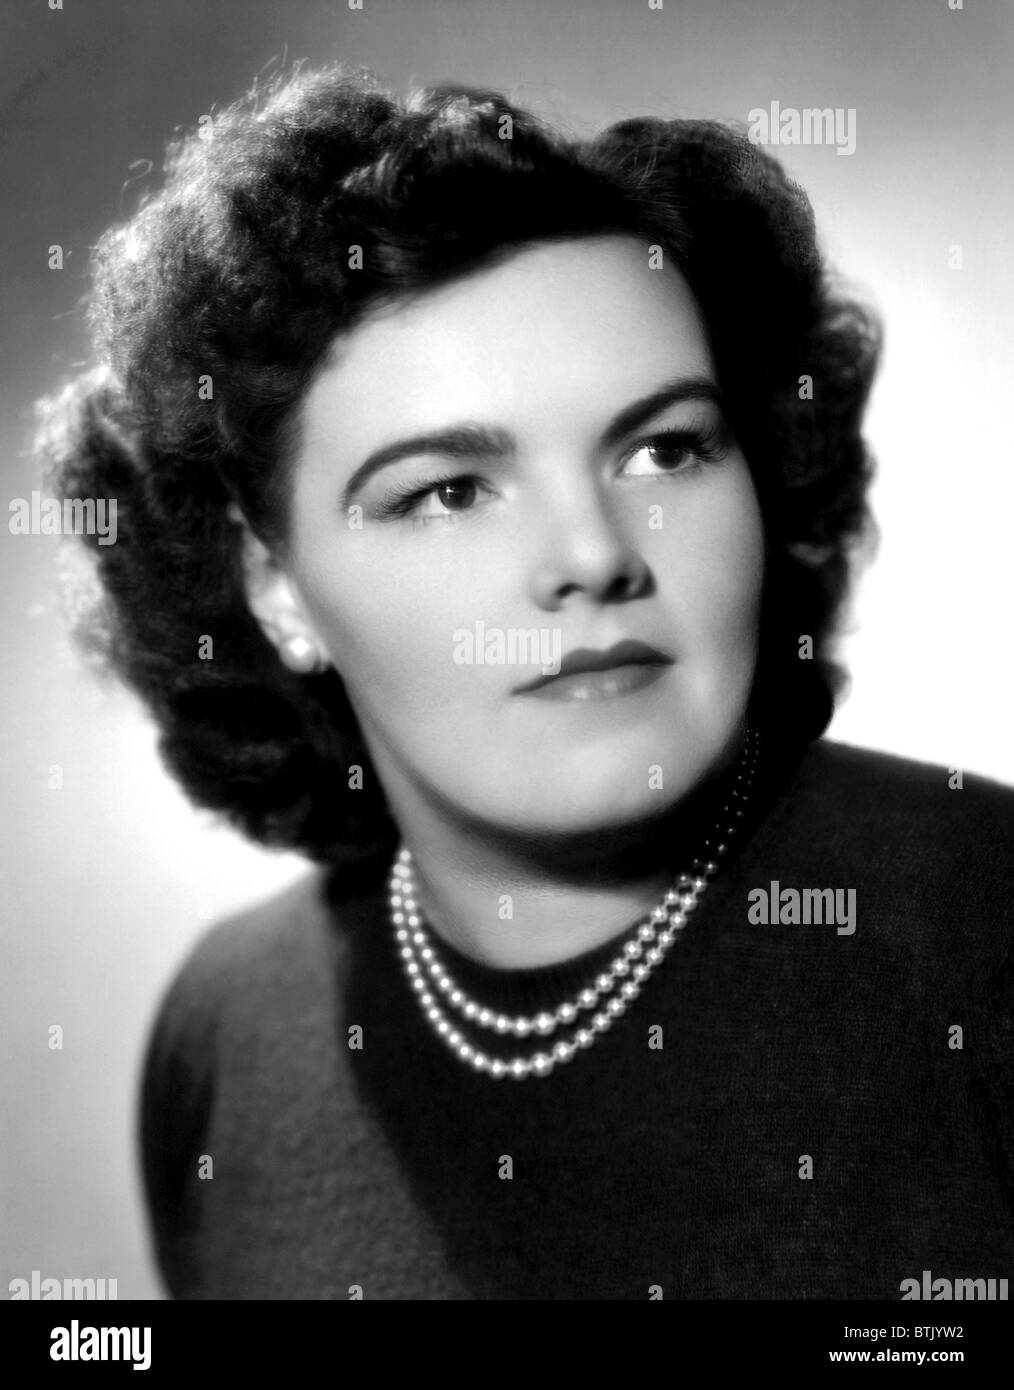 1940s Hairstyles Black And White Stock Photos Images Alamy